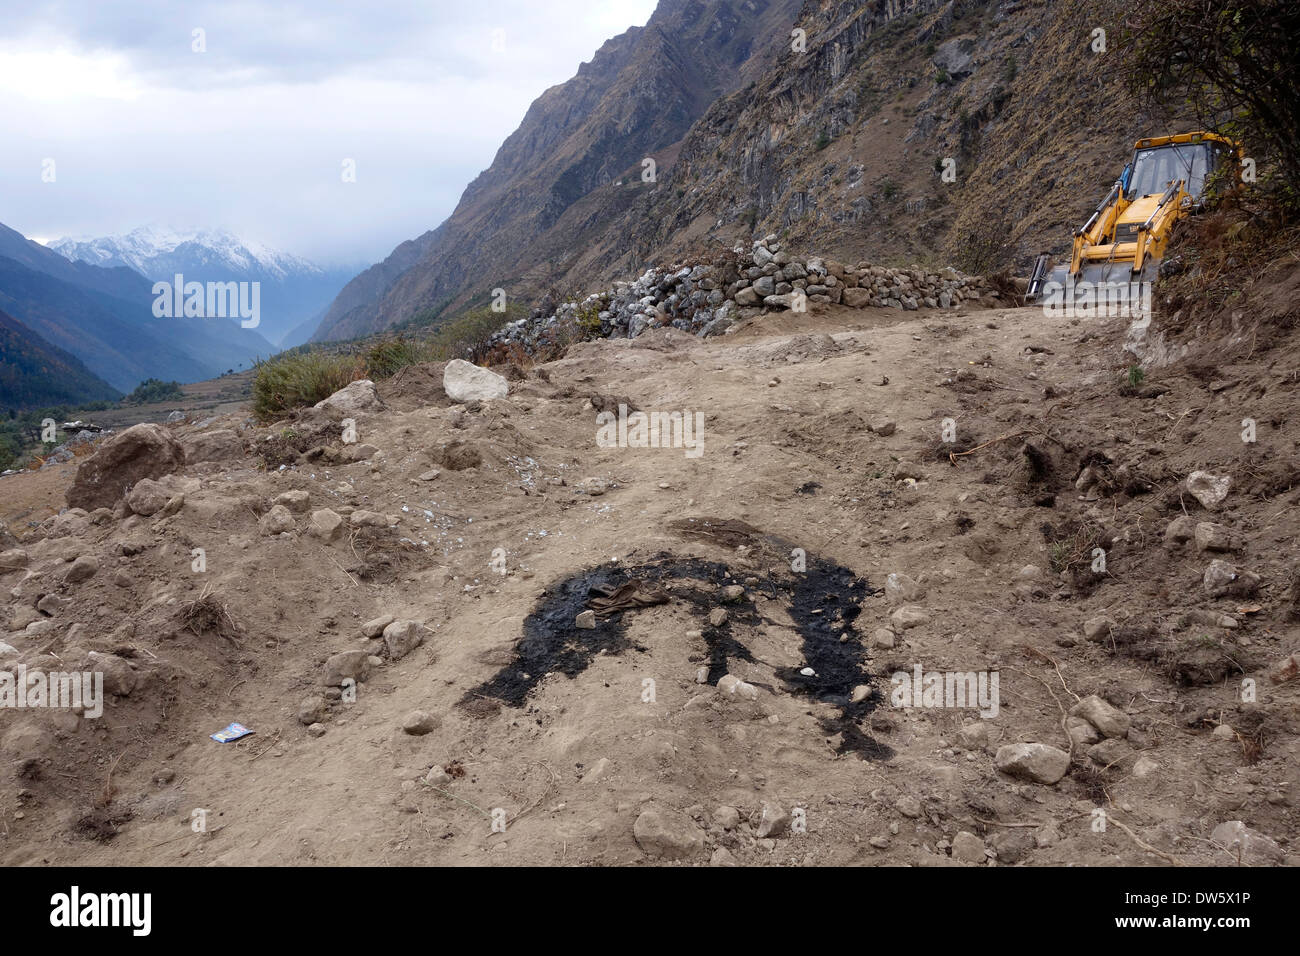 Excavator and spilled motor oil on a controversial new road in the Tsum Valley, Nepal. Stock Photo